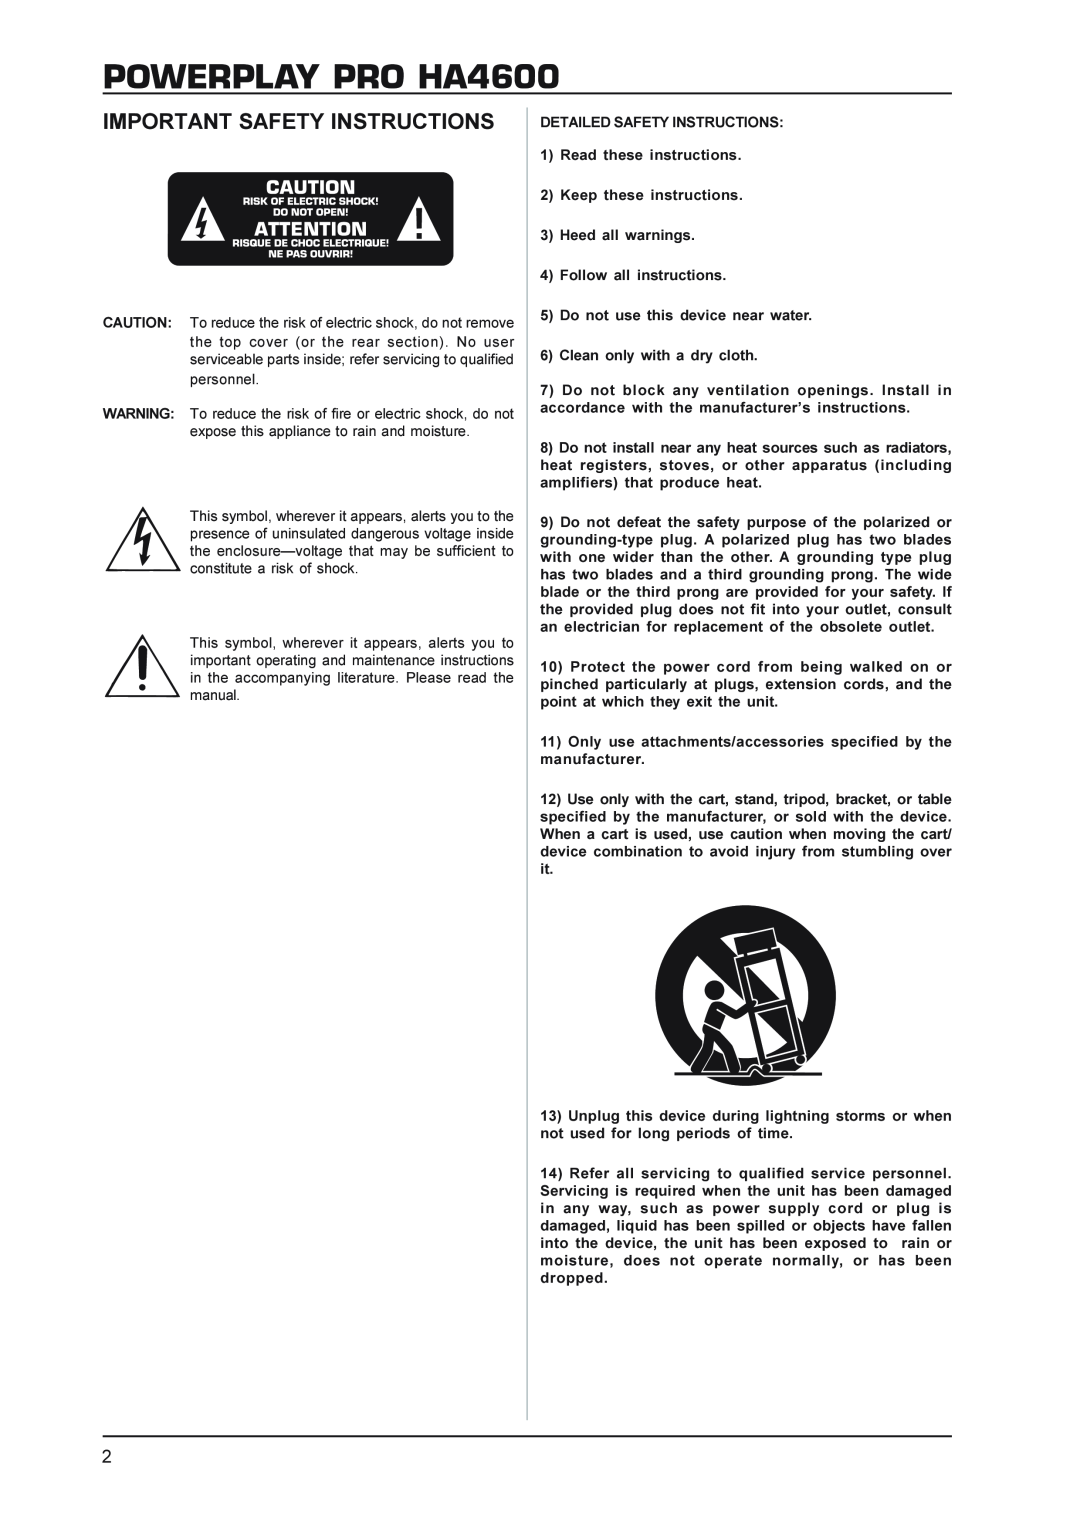 Hanns.G manual POWERPLAY PRO HA4600, Important Safety Instructions 